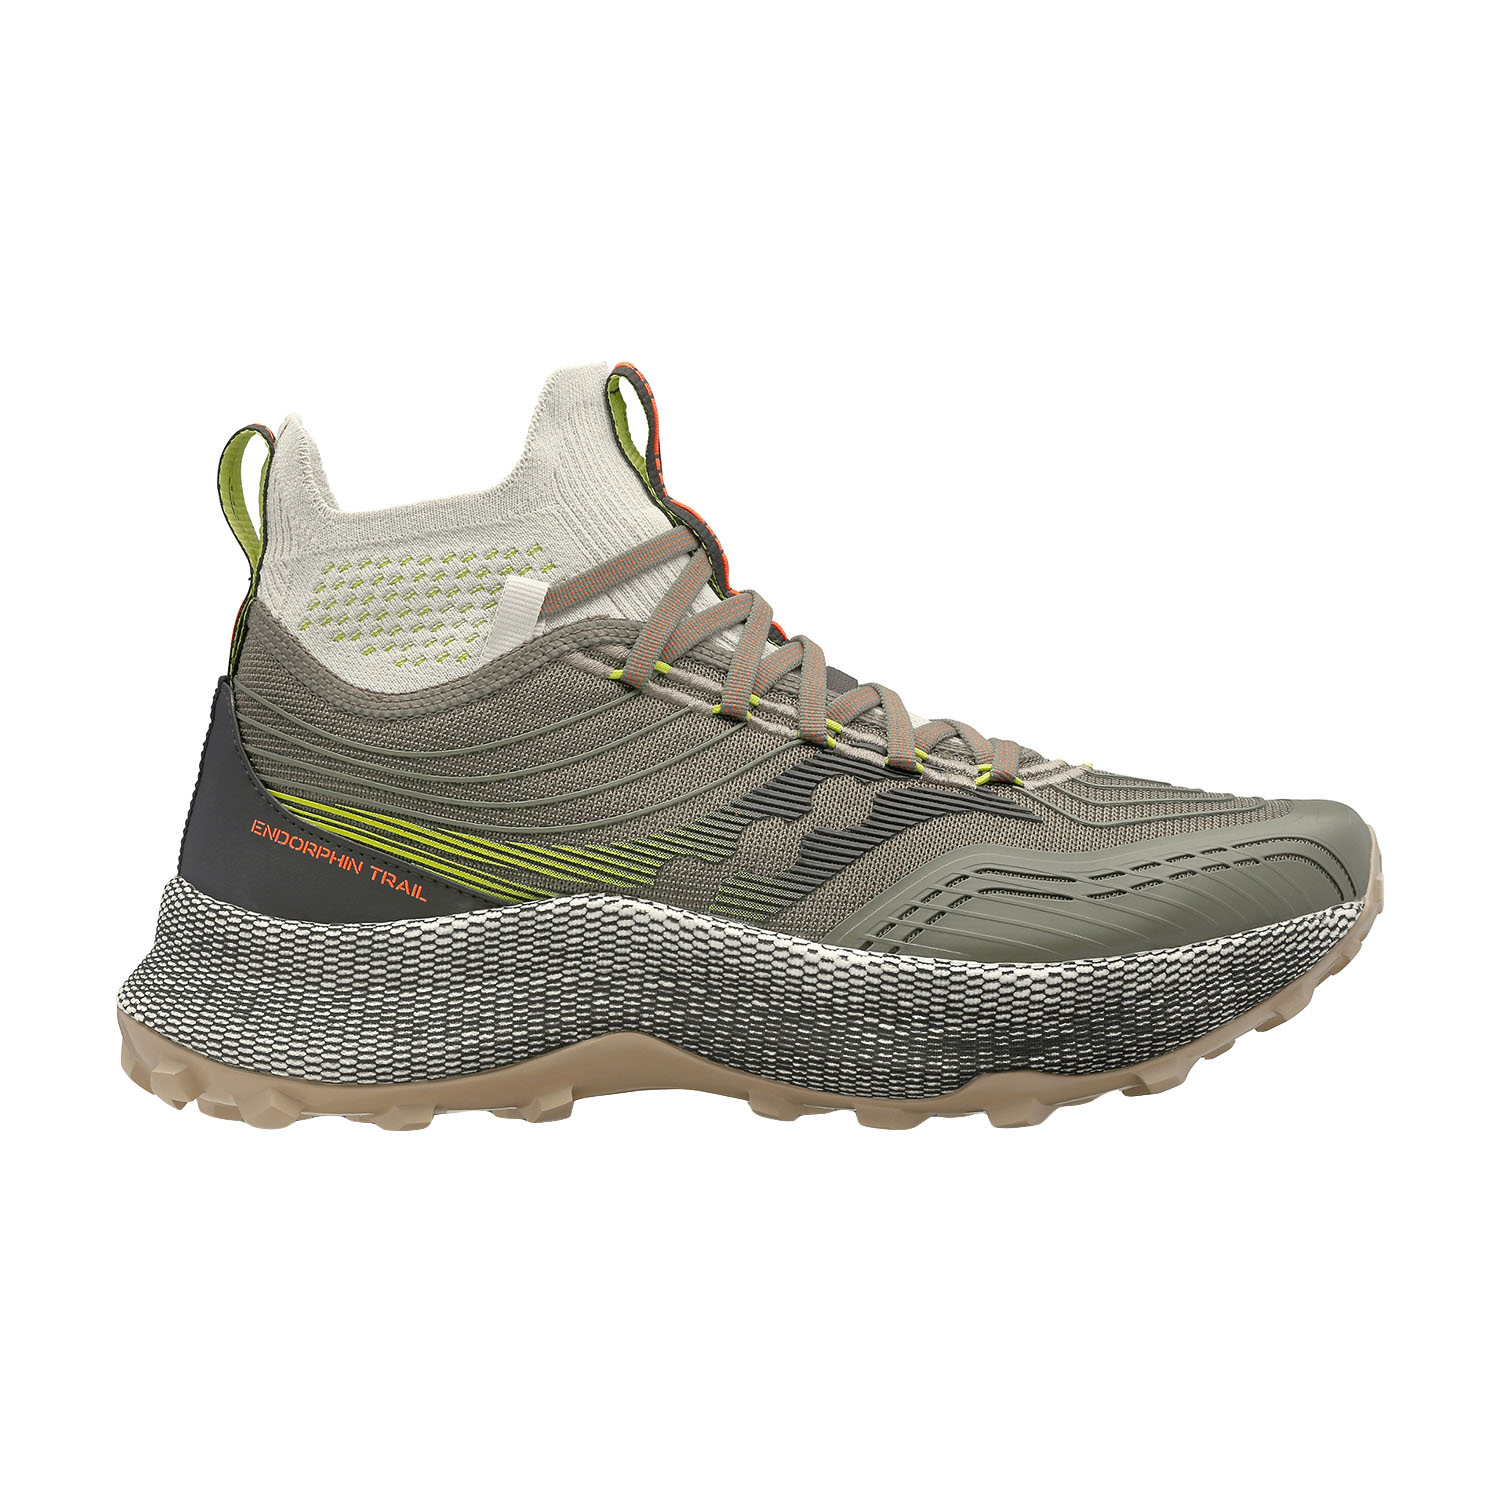 Saucony Endorphin Trail Zapatillas Running Hombre Olive